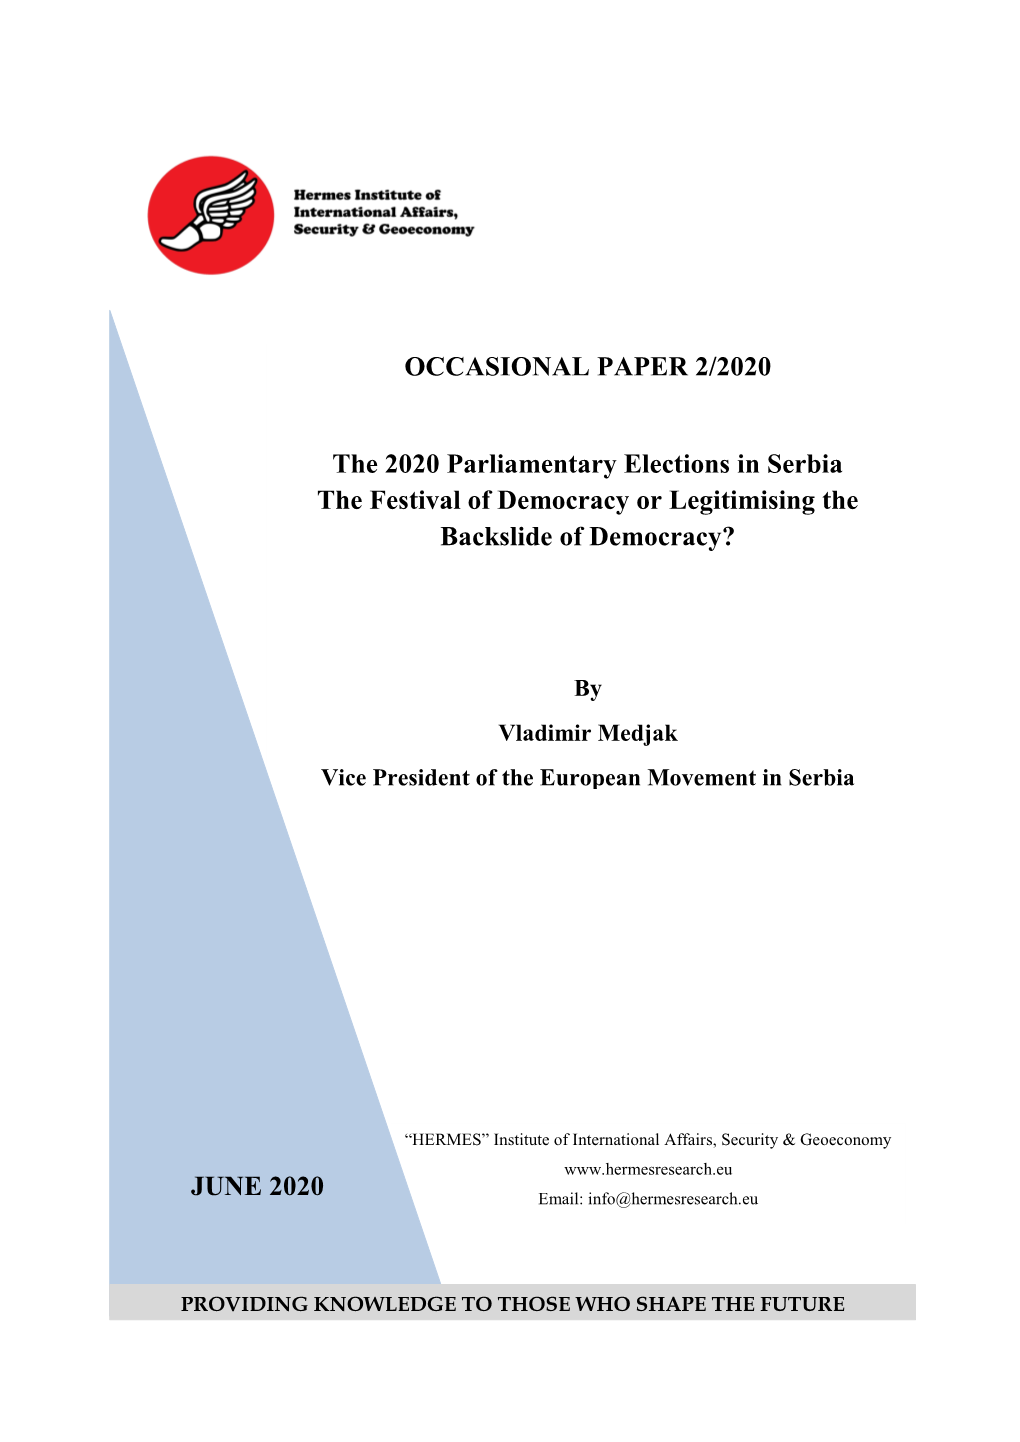 OCCASIONAL PAPER 2/2020 the 2020 Parliamentary Elections In